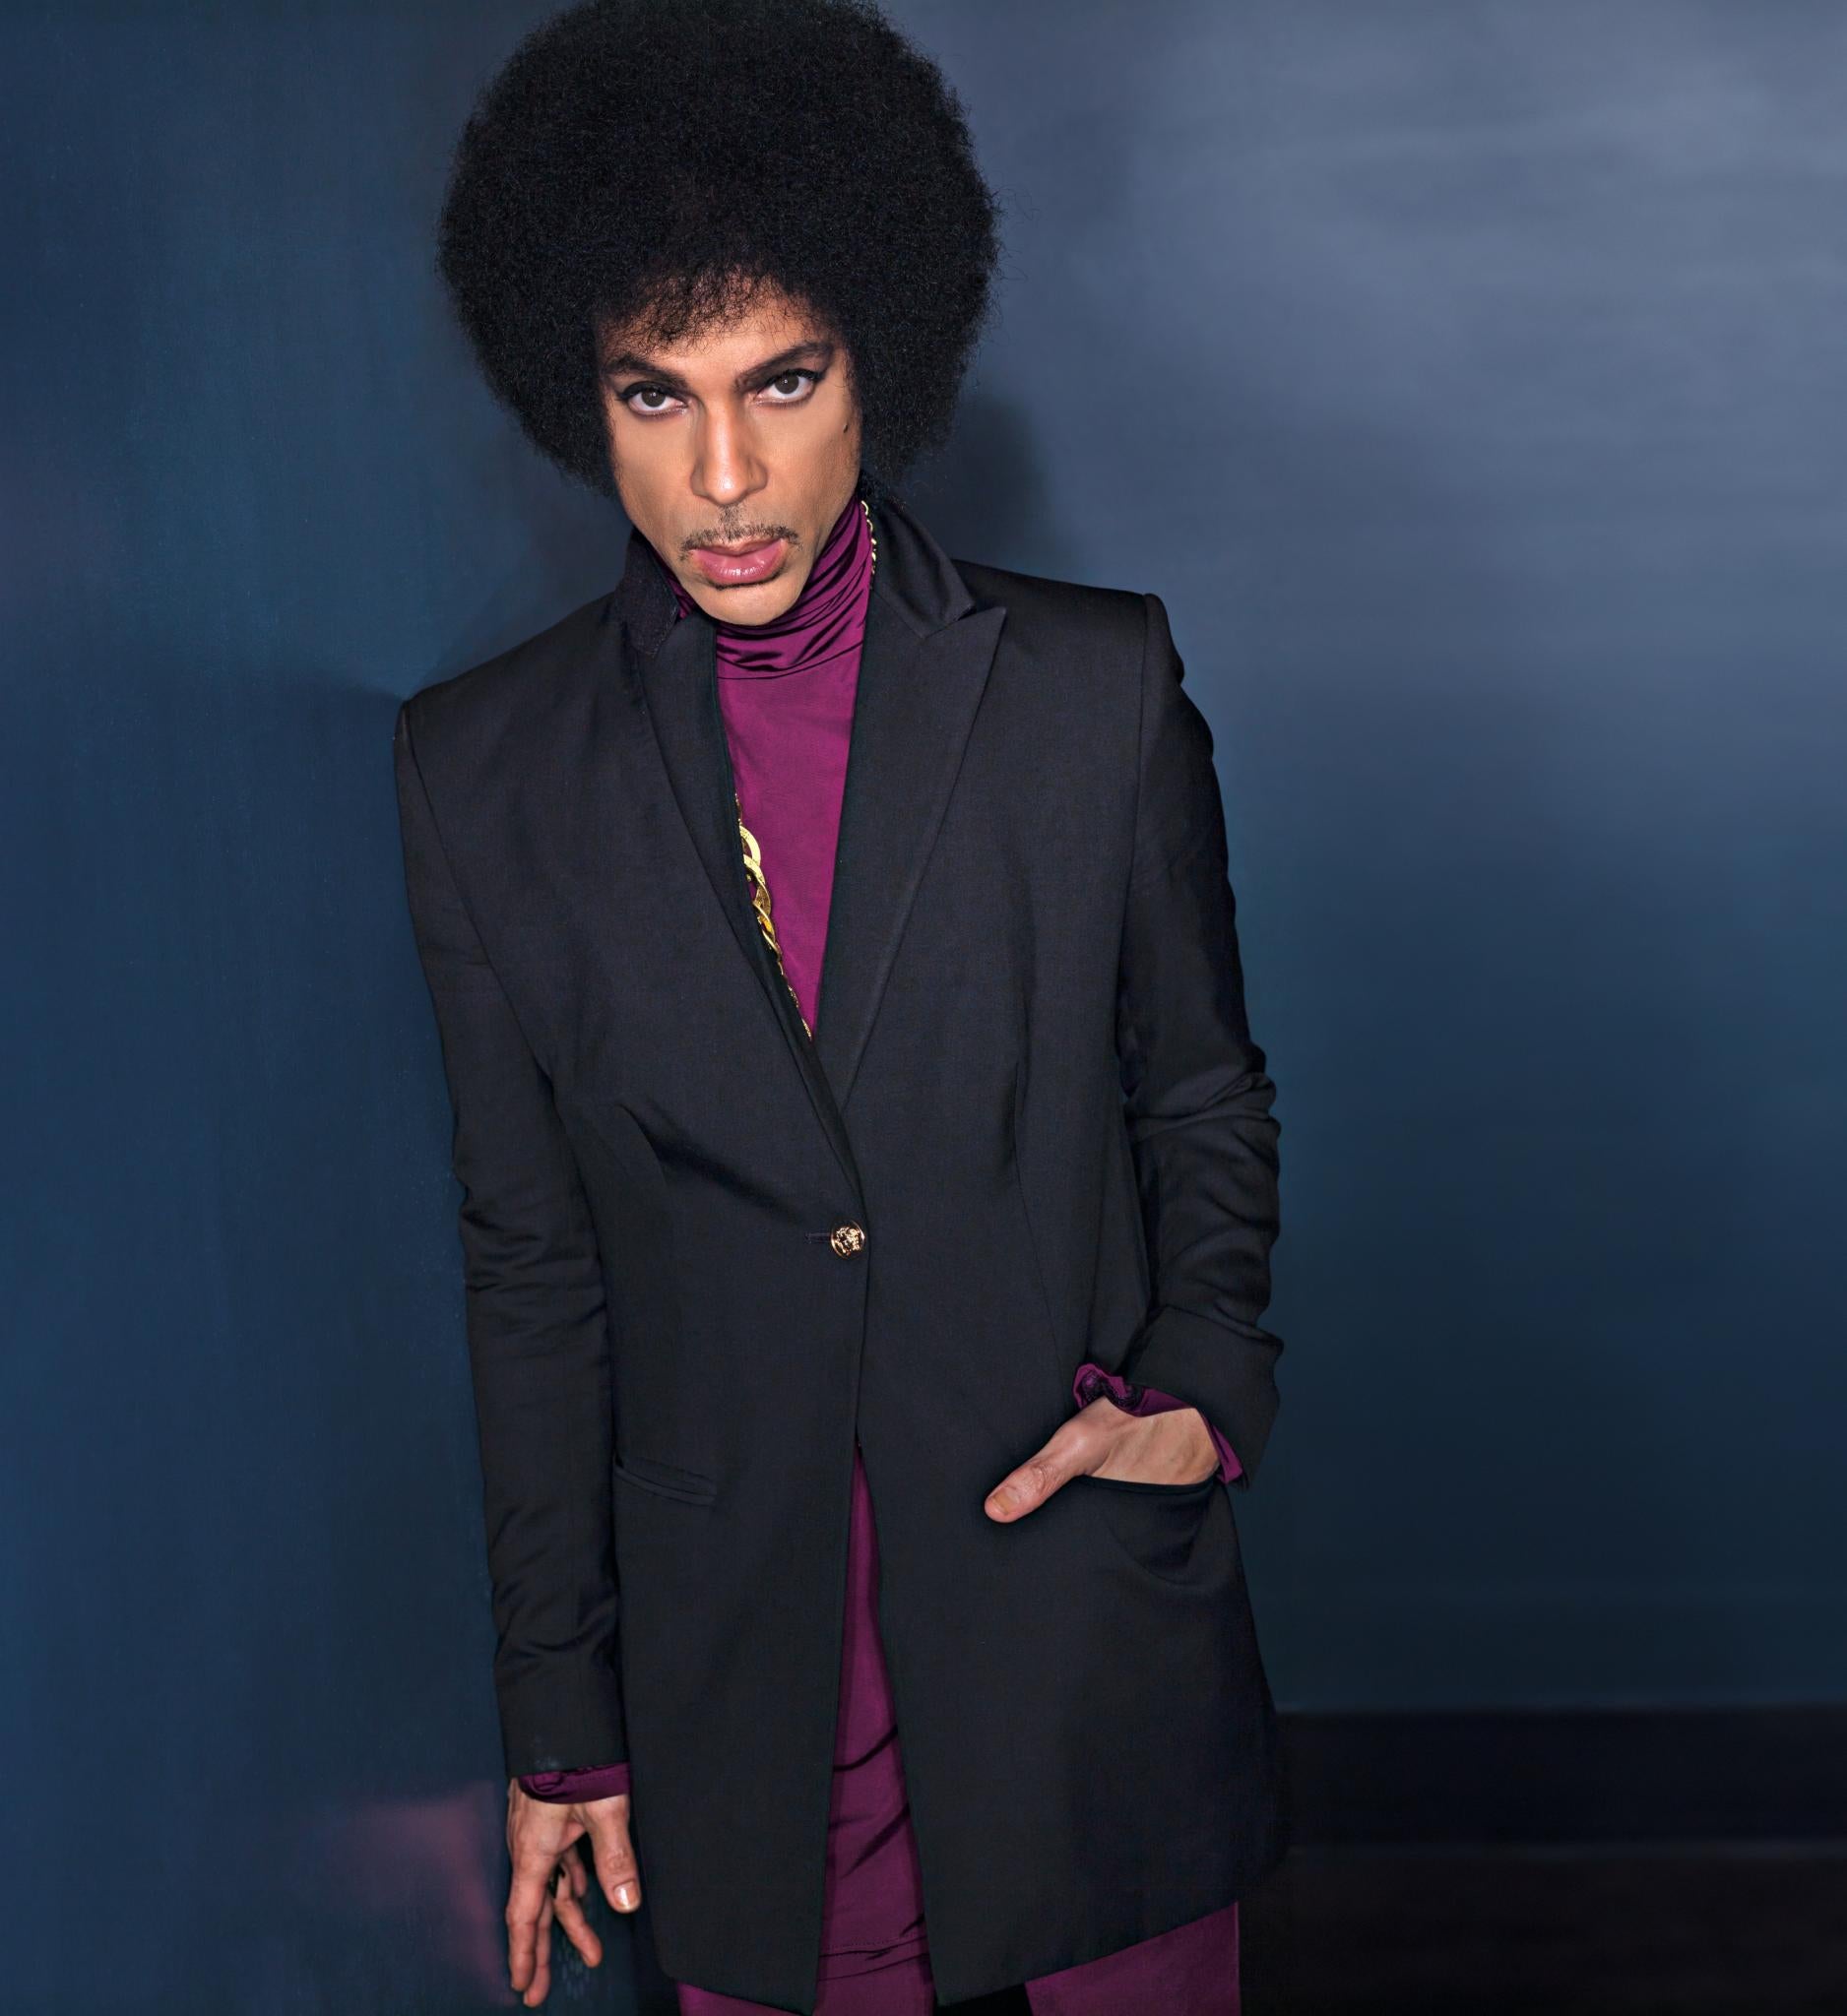 Is There a New Prince Album In the Works?